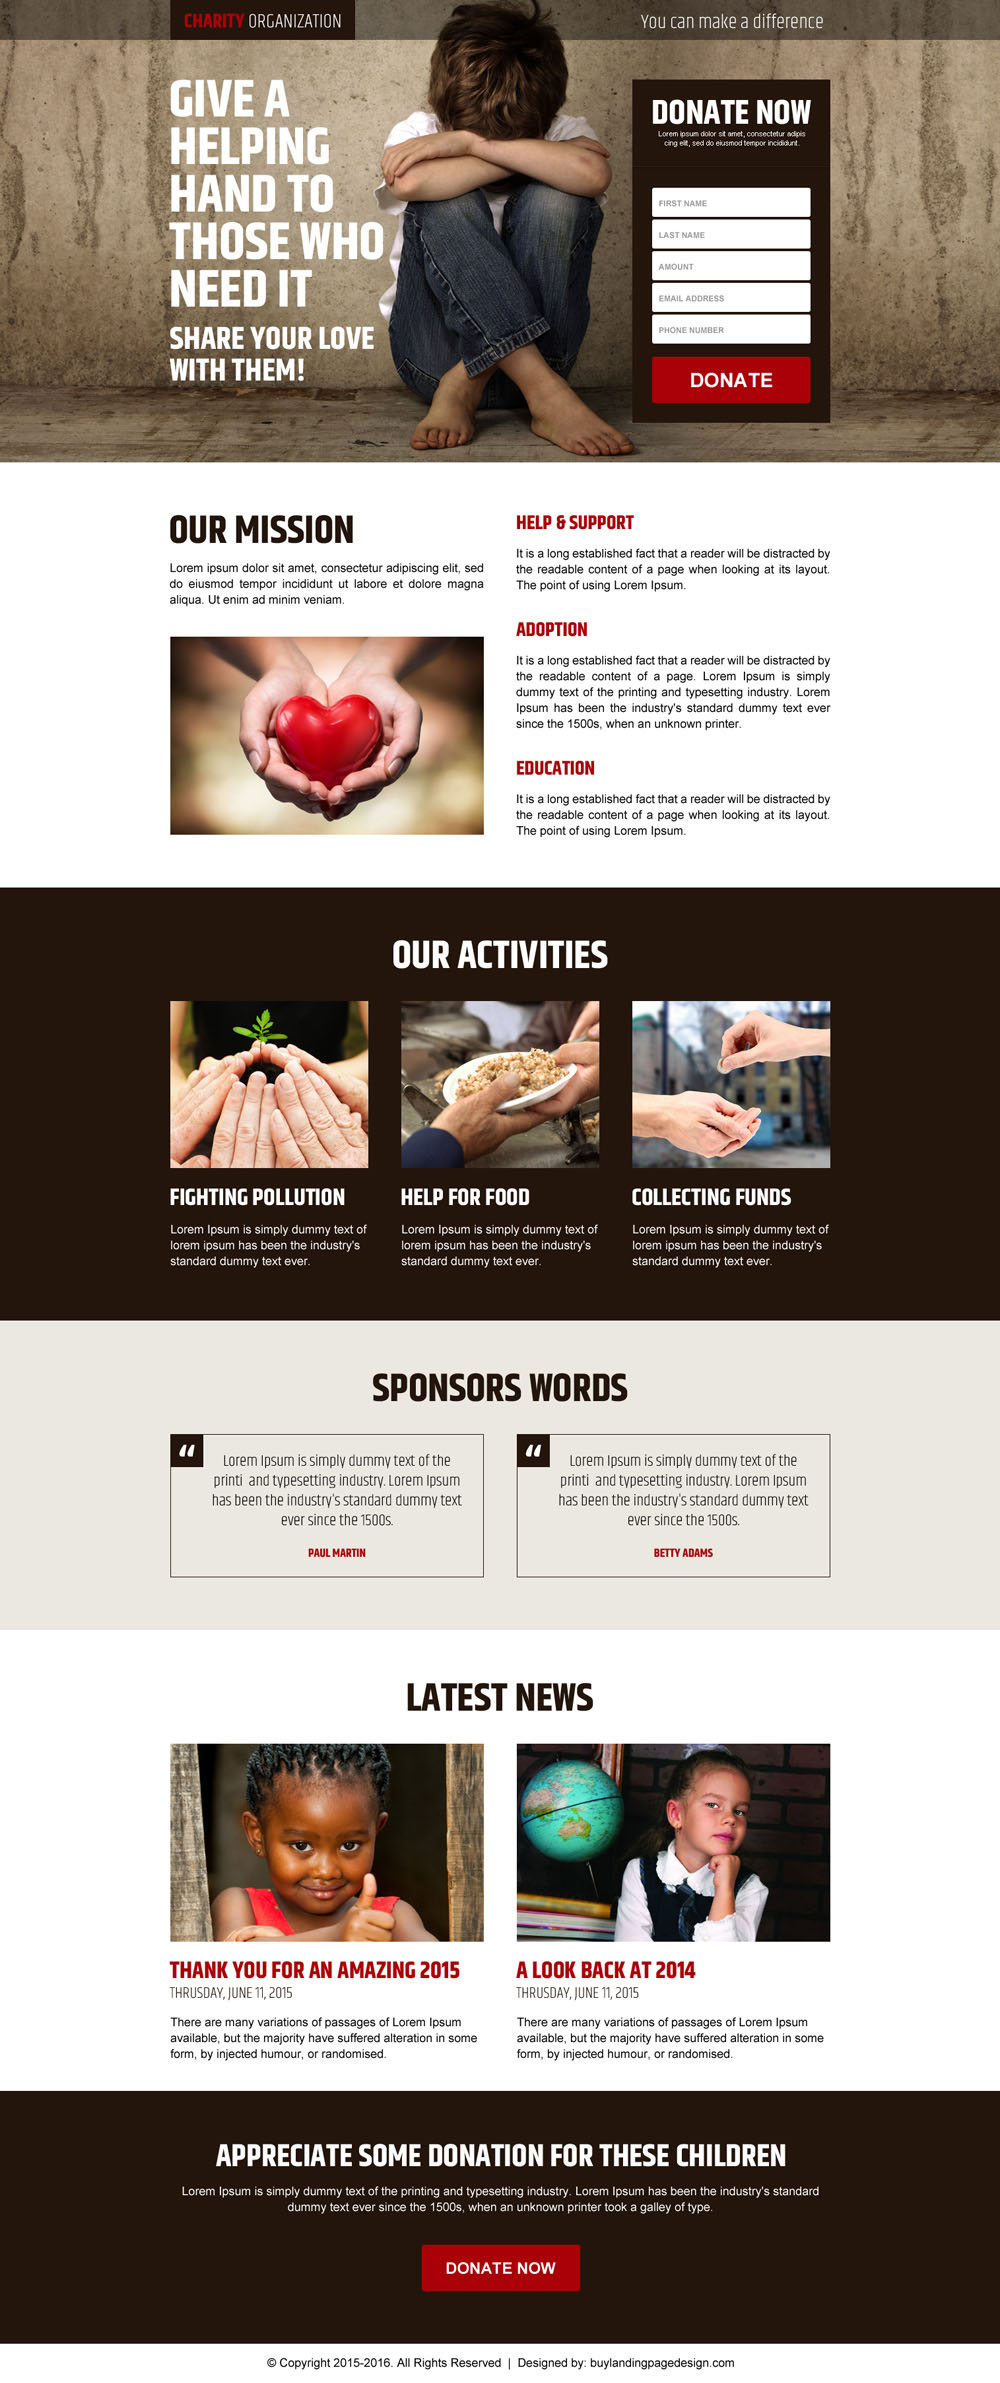 charity-organization-landing-page-design-templates-to-capture-leads-001